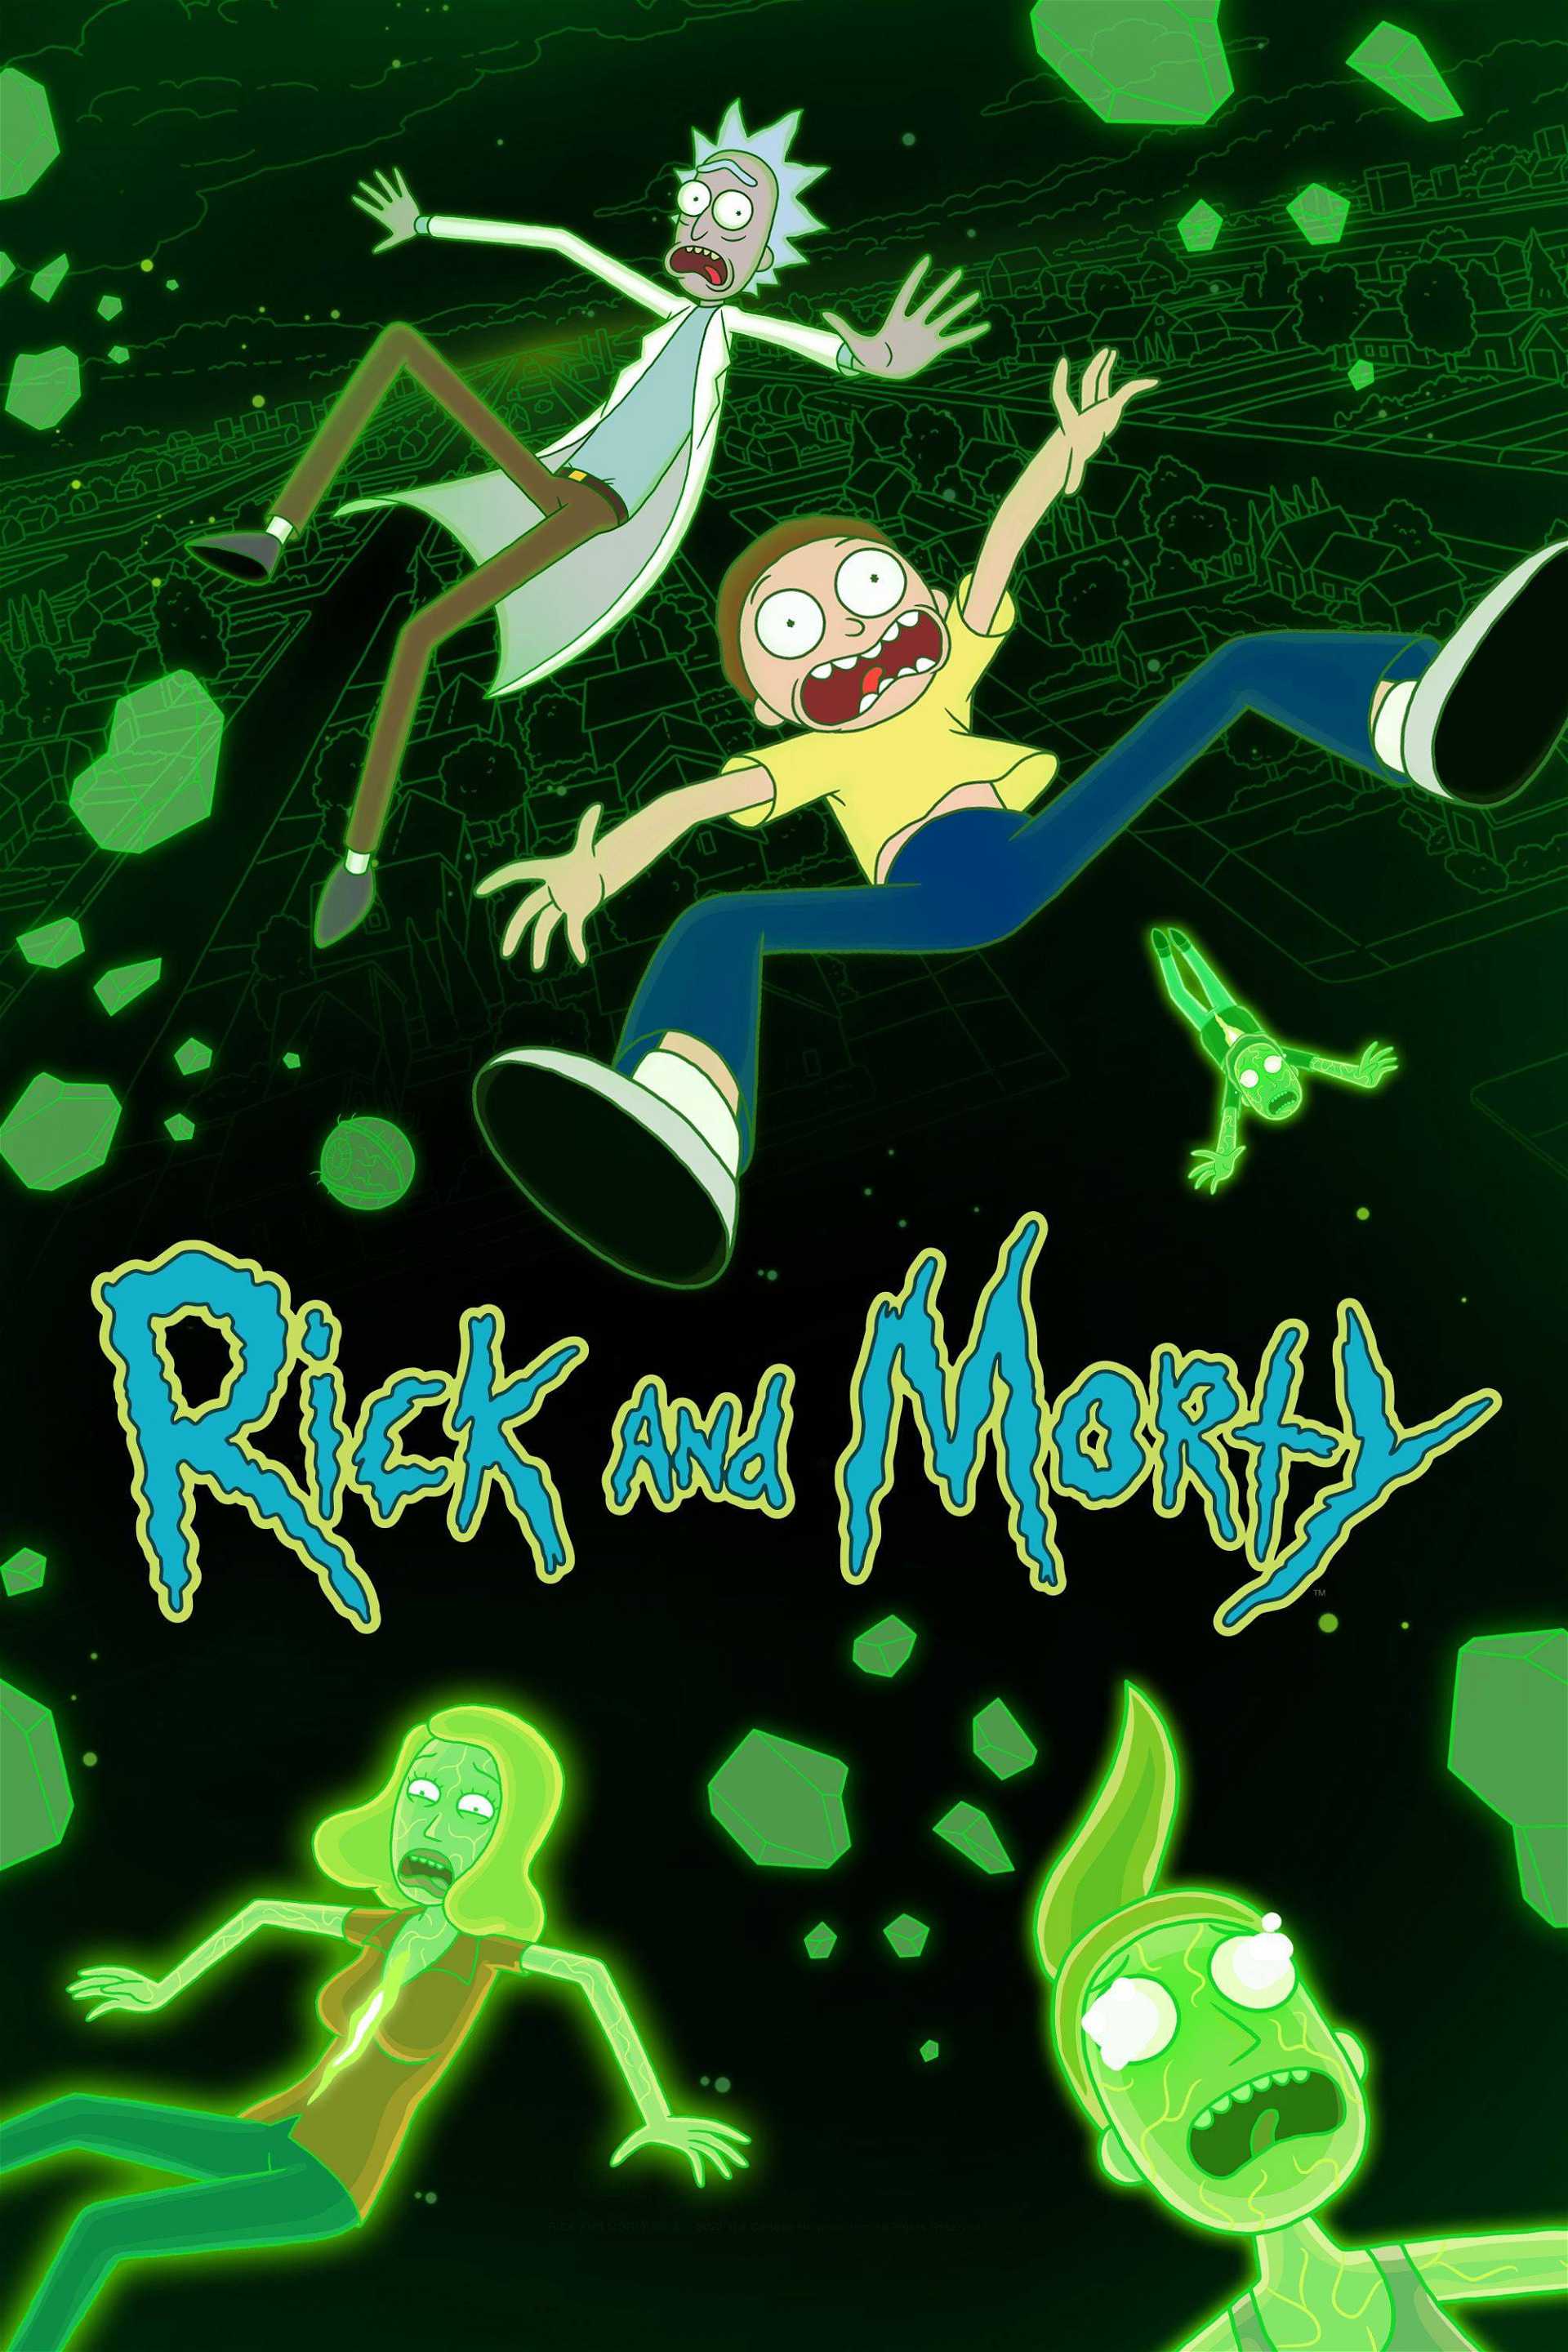 Rick and Morty in streaming